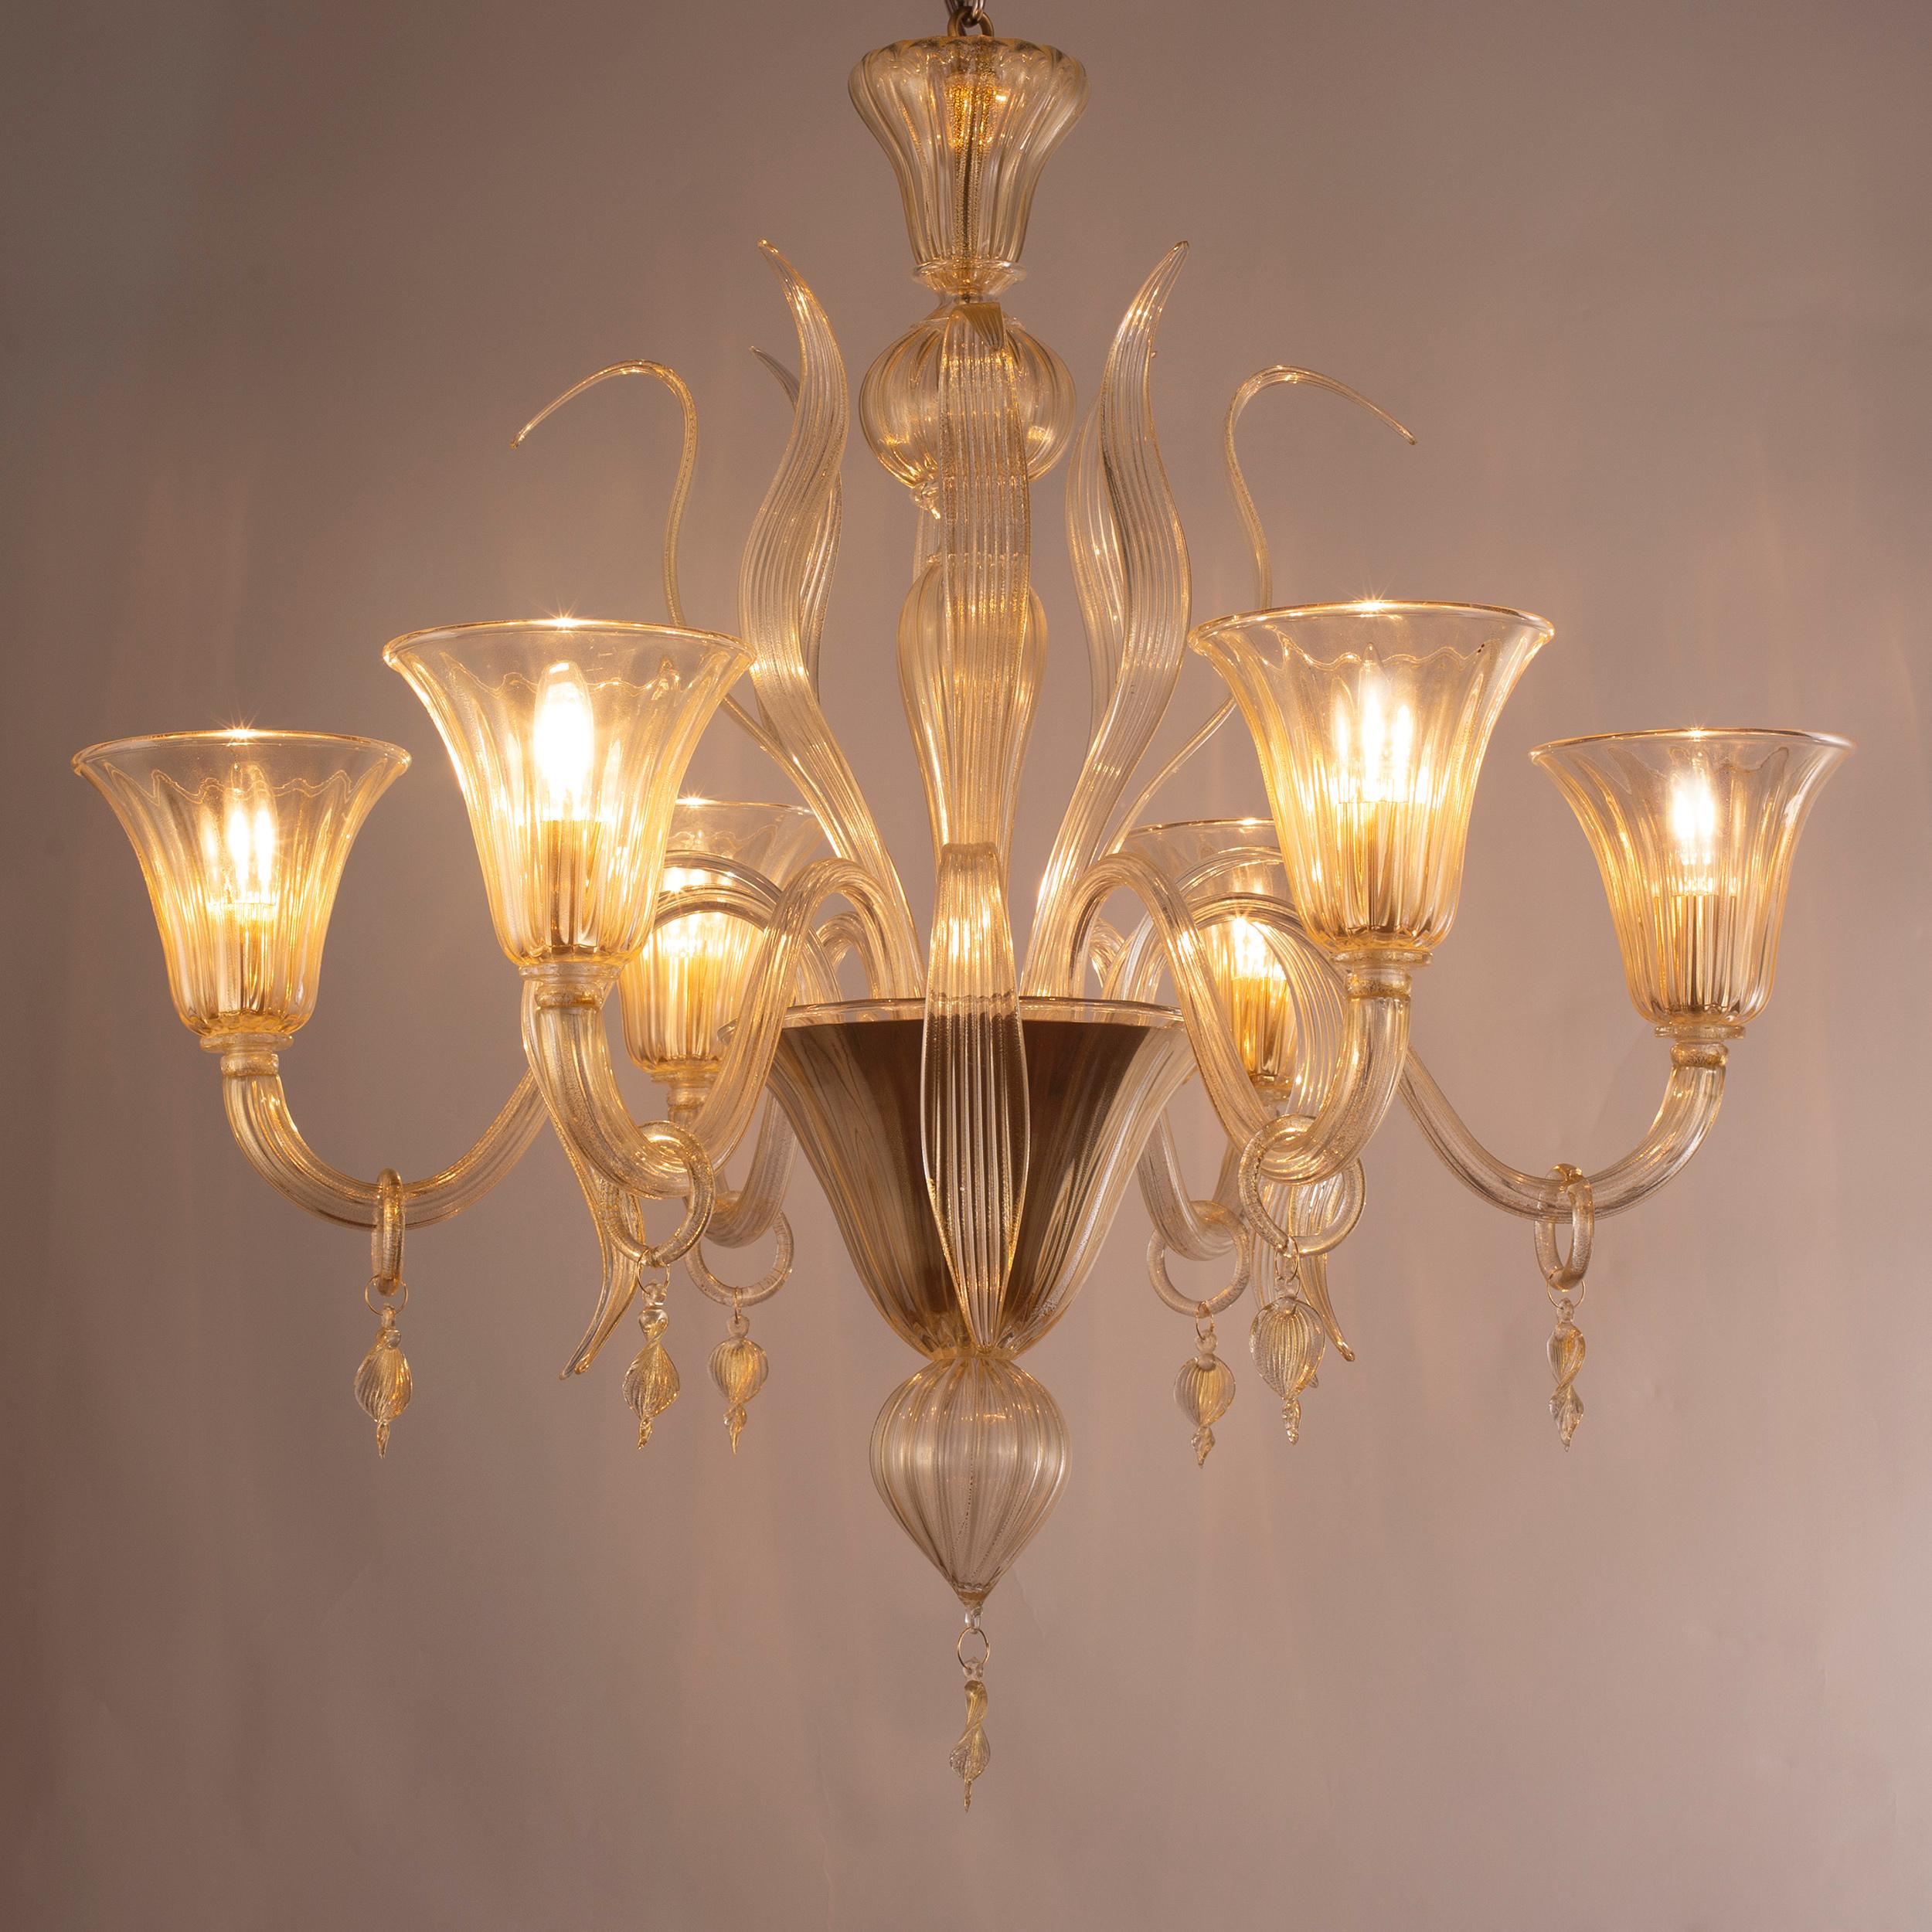 Fluage chandelier 6 lights Fluage, Gold Murano glass with rings and pendants by Multiforme

The blown glass chandelier Fluage is the perfect combination between the Venetian tradition and the most refined design. To manufacture the blown glass